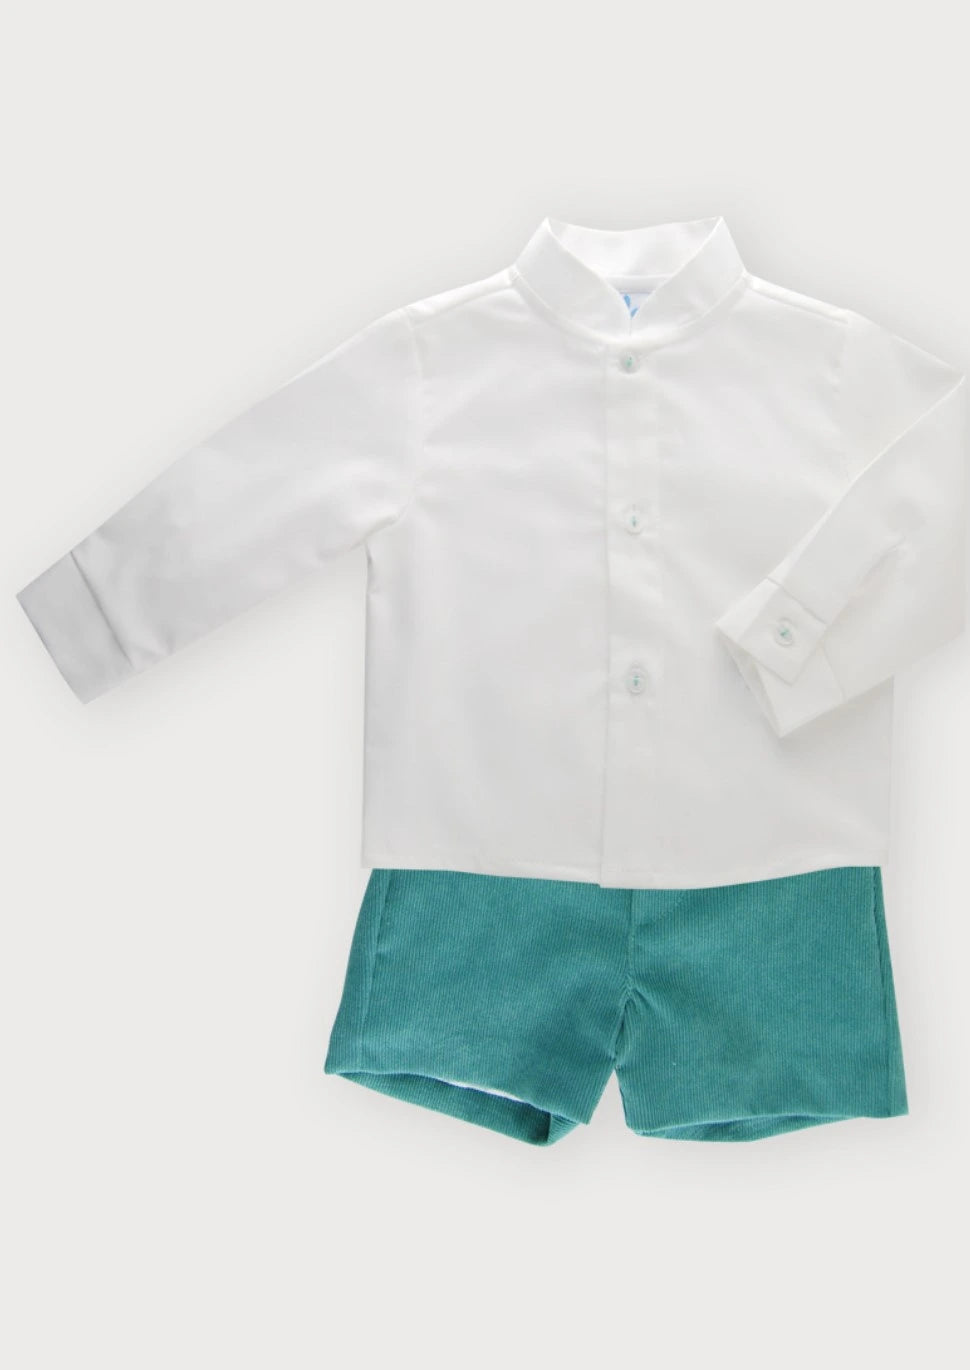 sardon andrew shirt and green shorts set from tors childrens wear